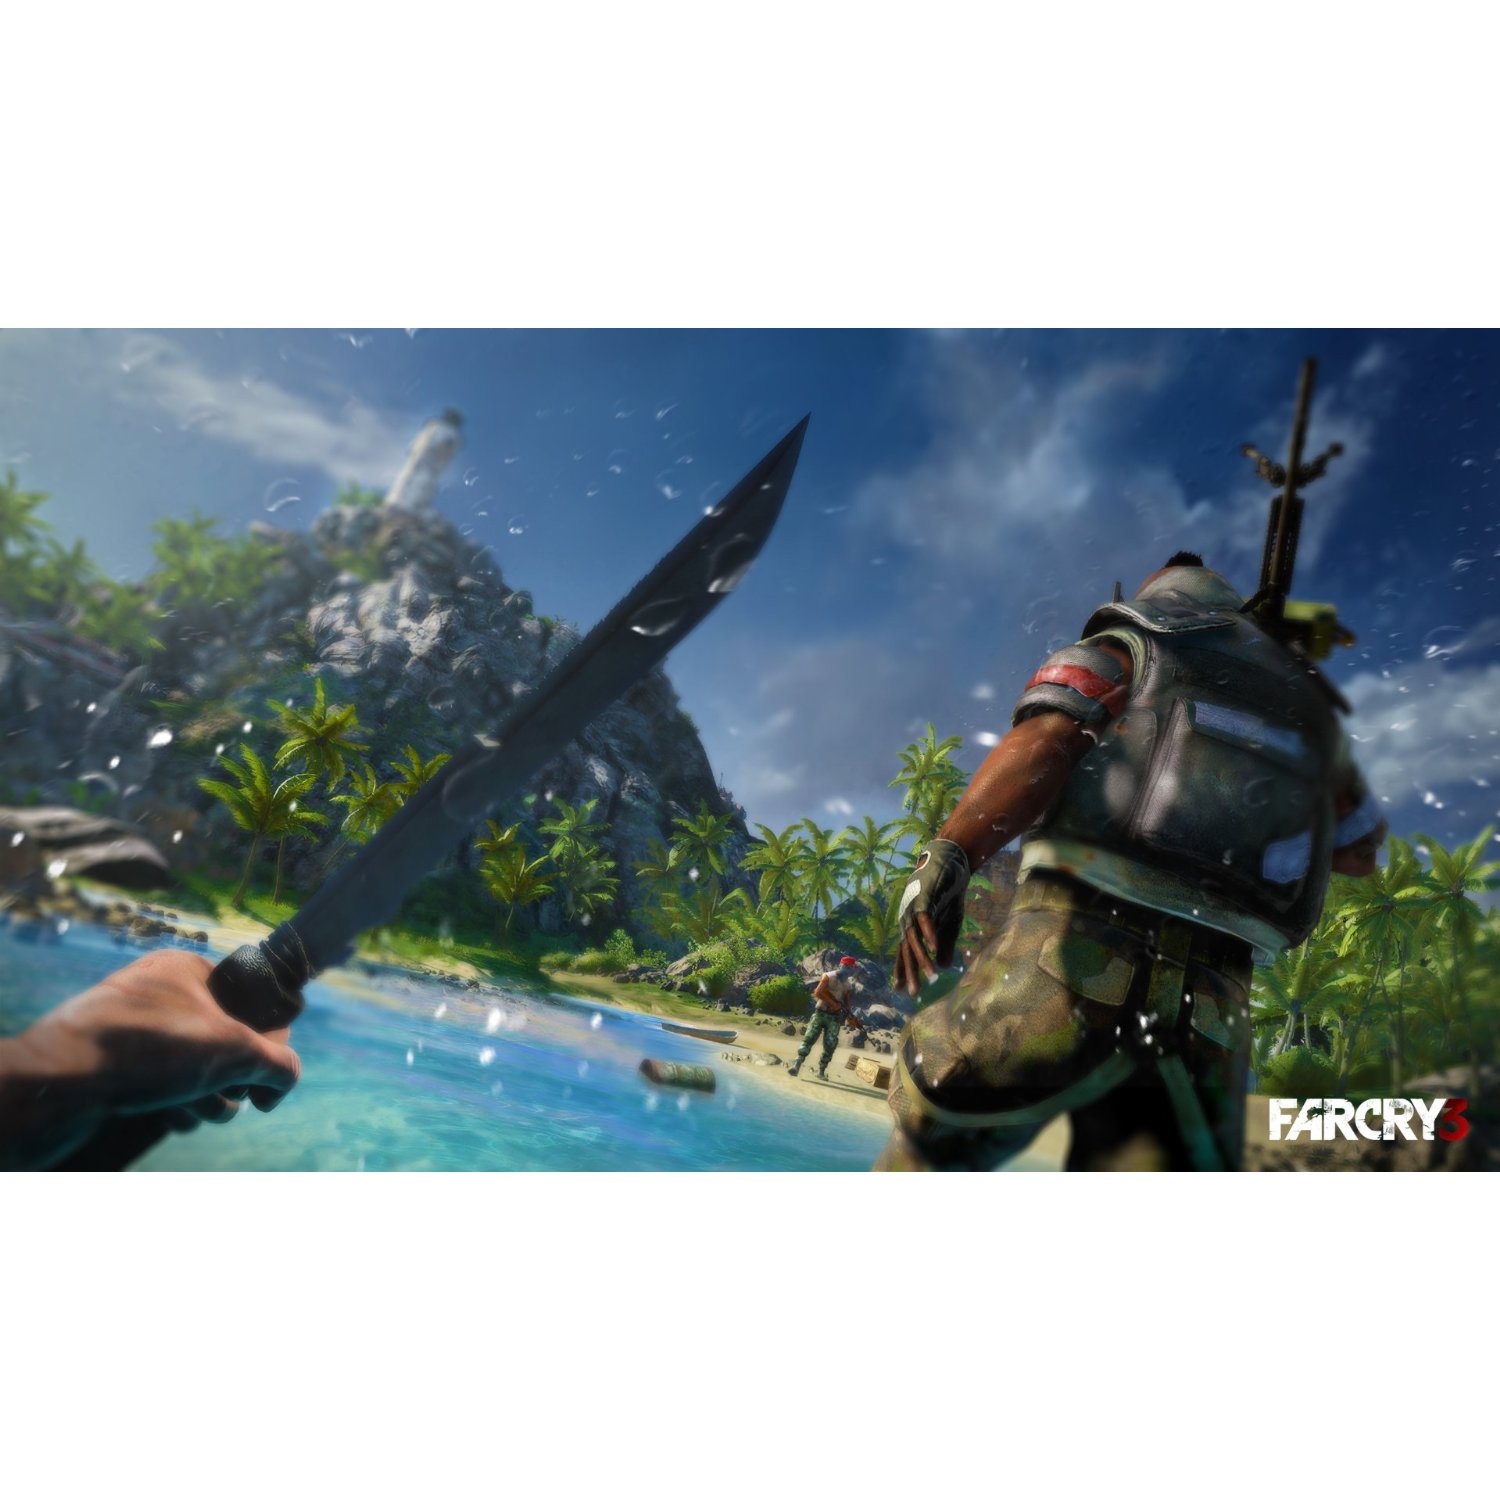 http://thetechjournal.com/wp-content/uploads/images/1203/1332755430-far-cry-3--game-for-pc-2.jpg